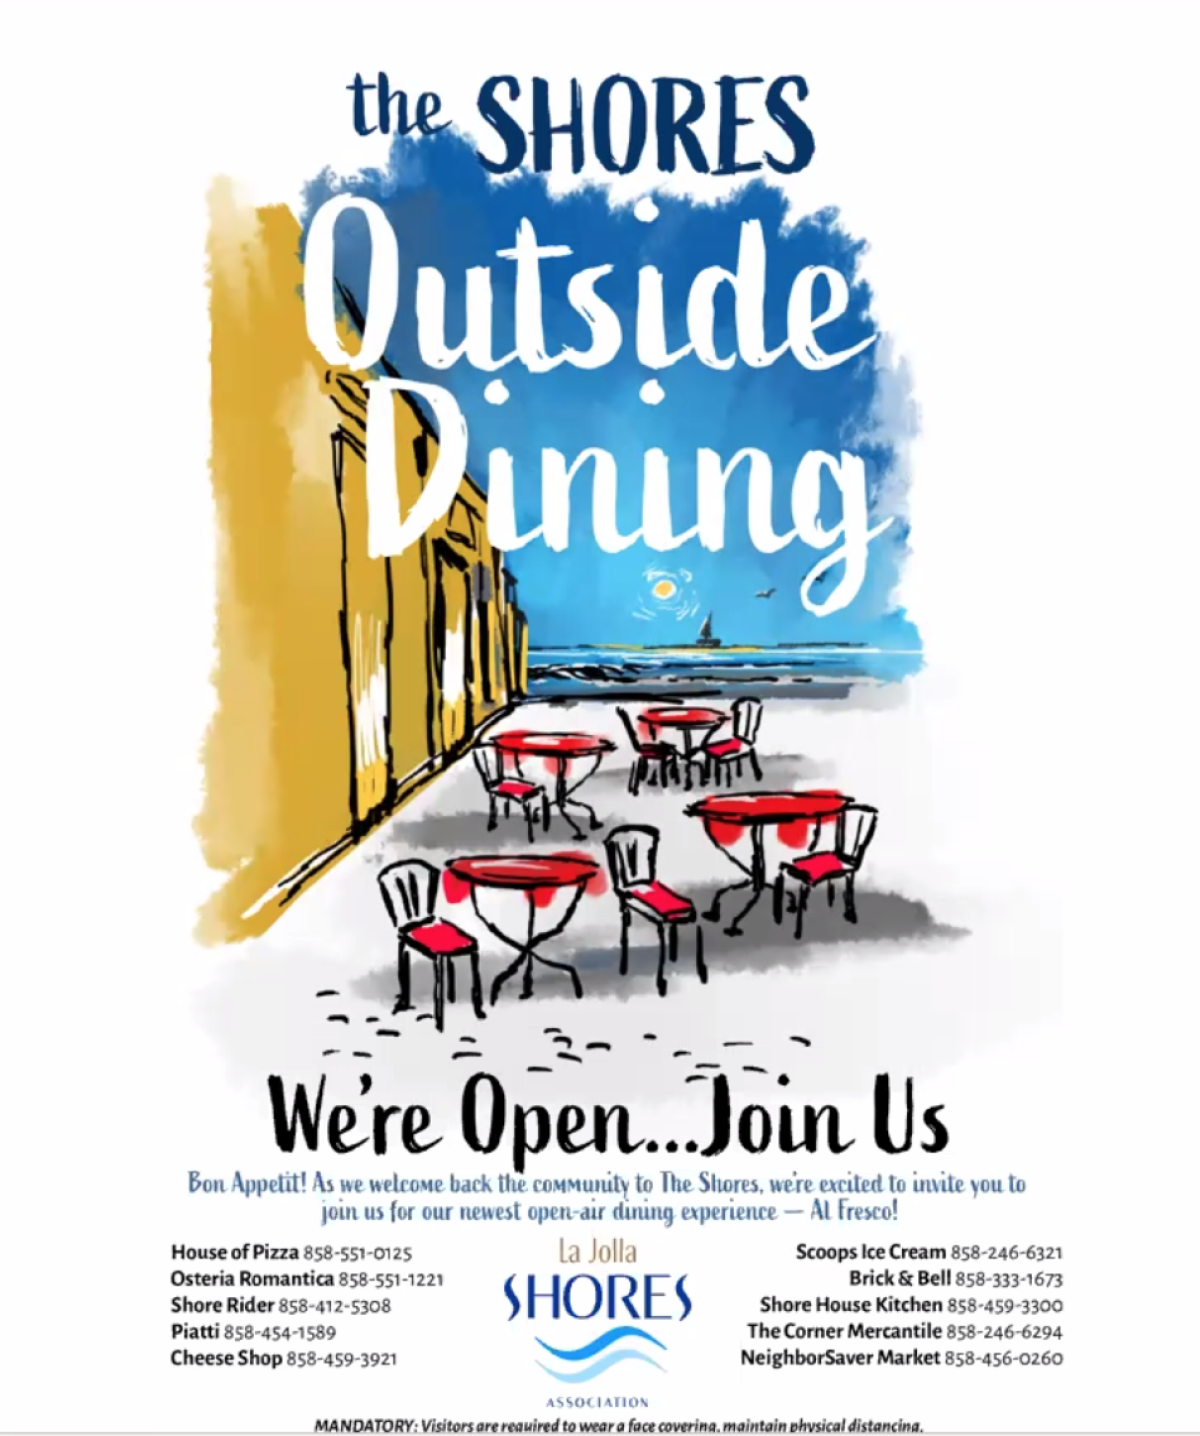 LJSA board member Ed Mackey created a sample flier in anticipation of the launch of an outdoor dining program in the Shores.